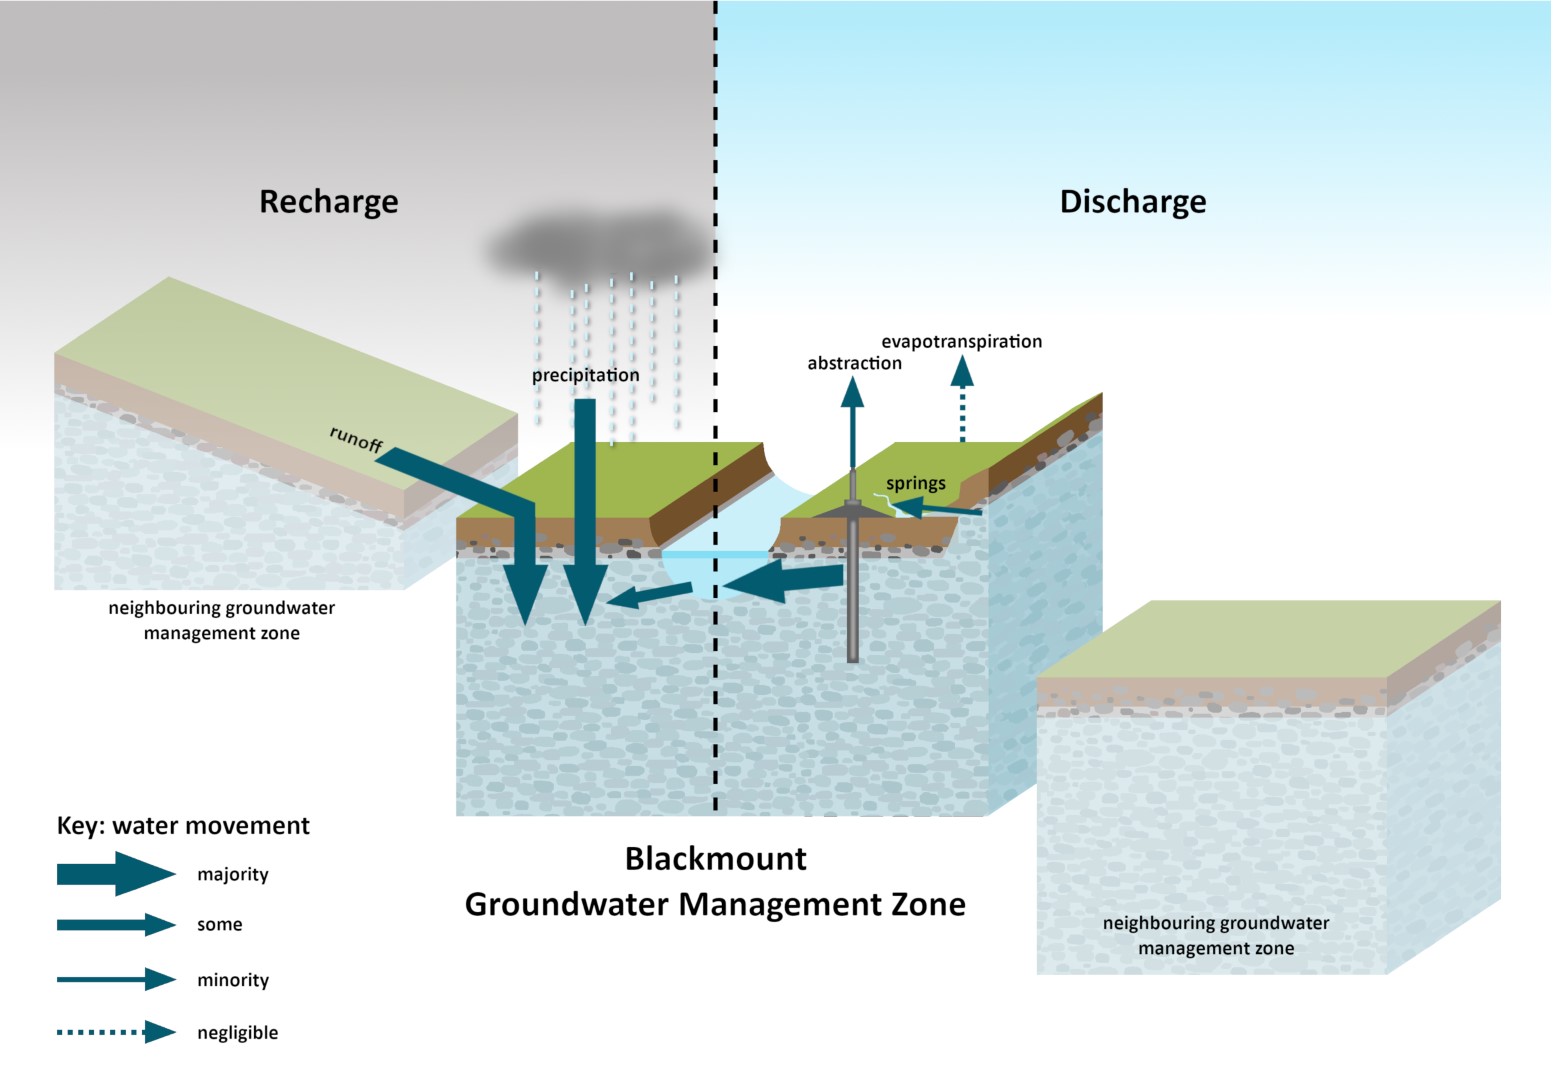 recharge and discharge in the blackmount groundwater management zone